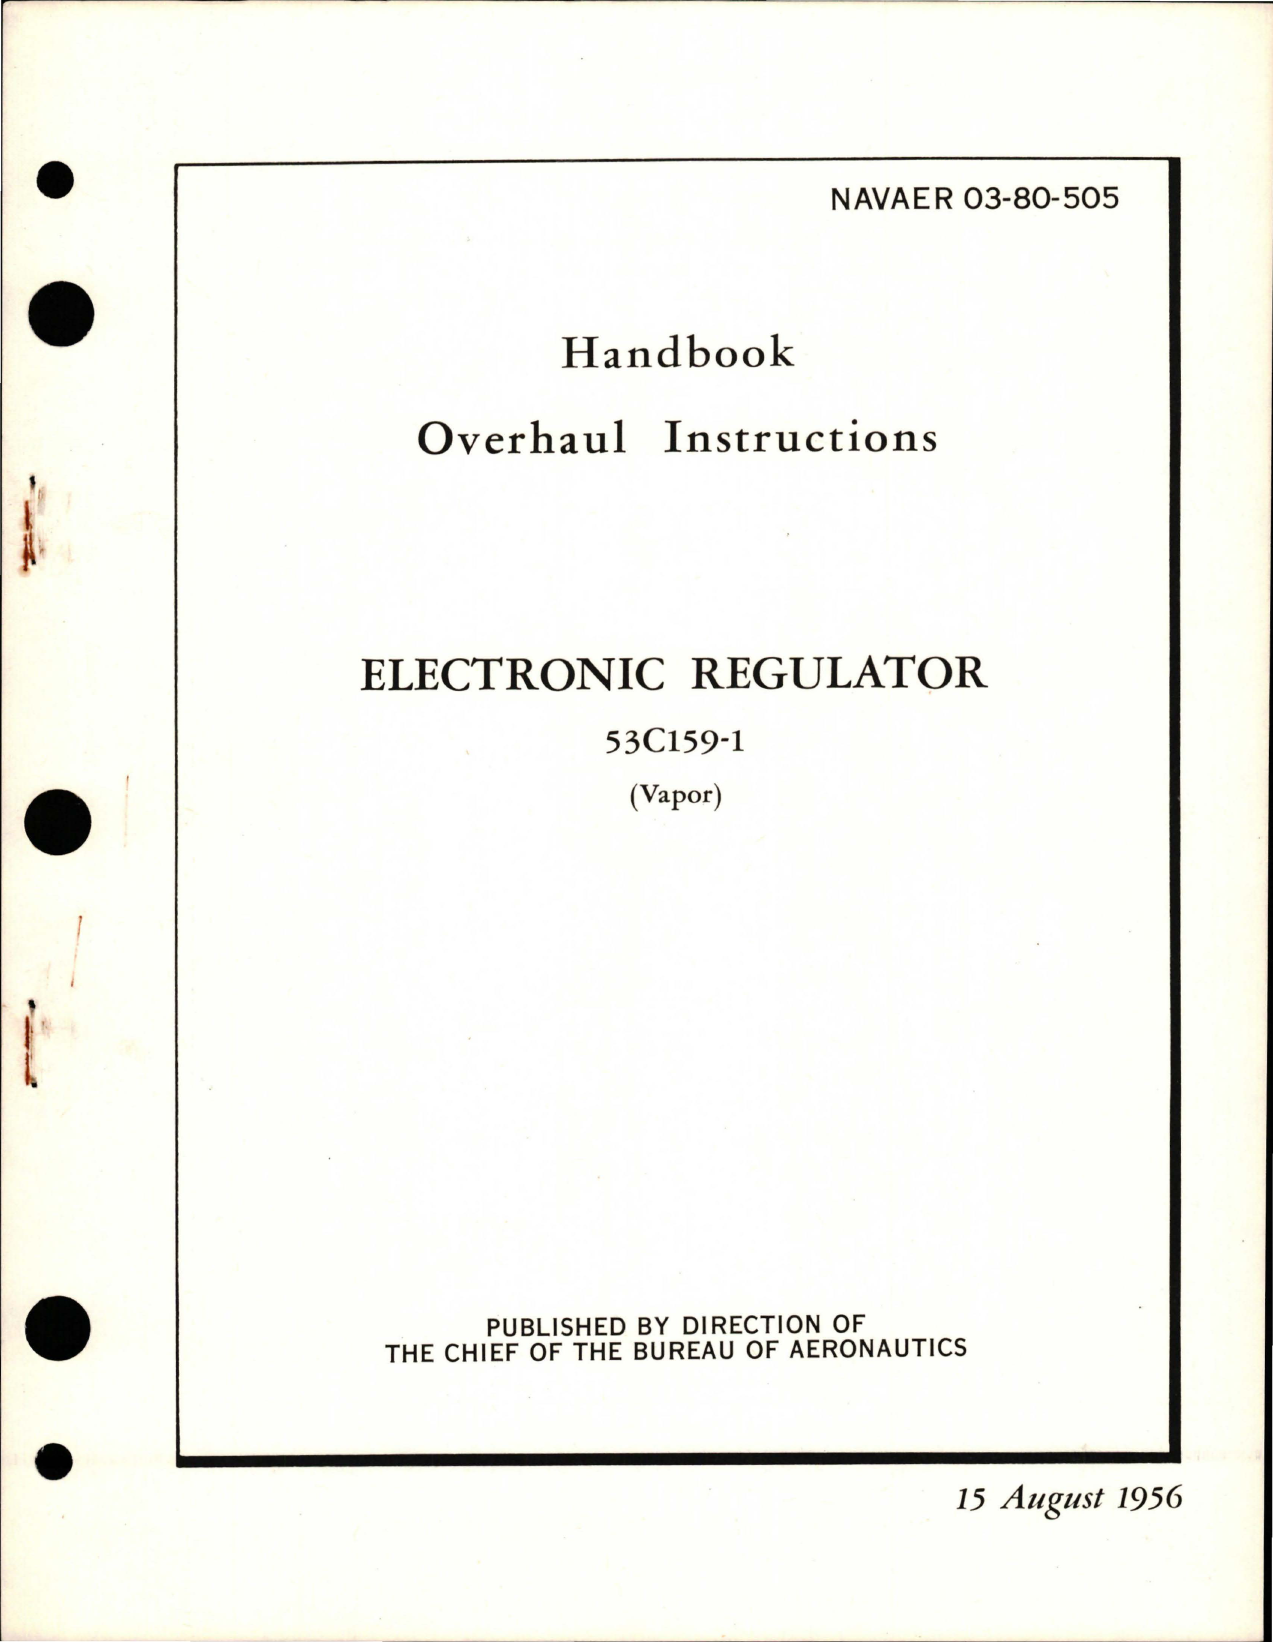 Sample page 1 from AirCorps Library document: Overhaul Instructions for Electronic Regulator - 53C159-1